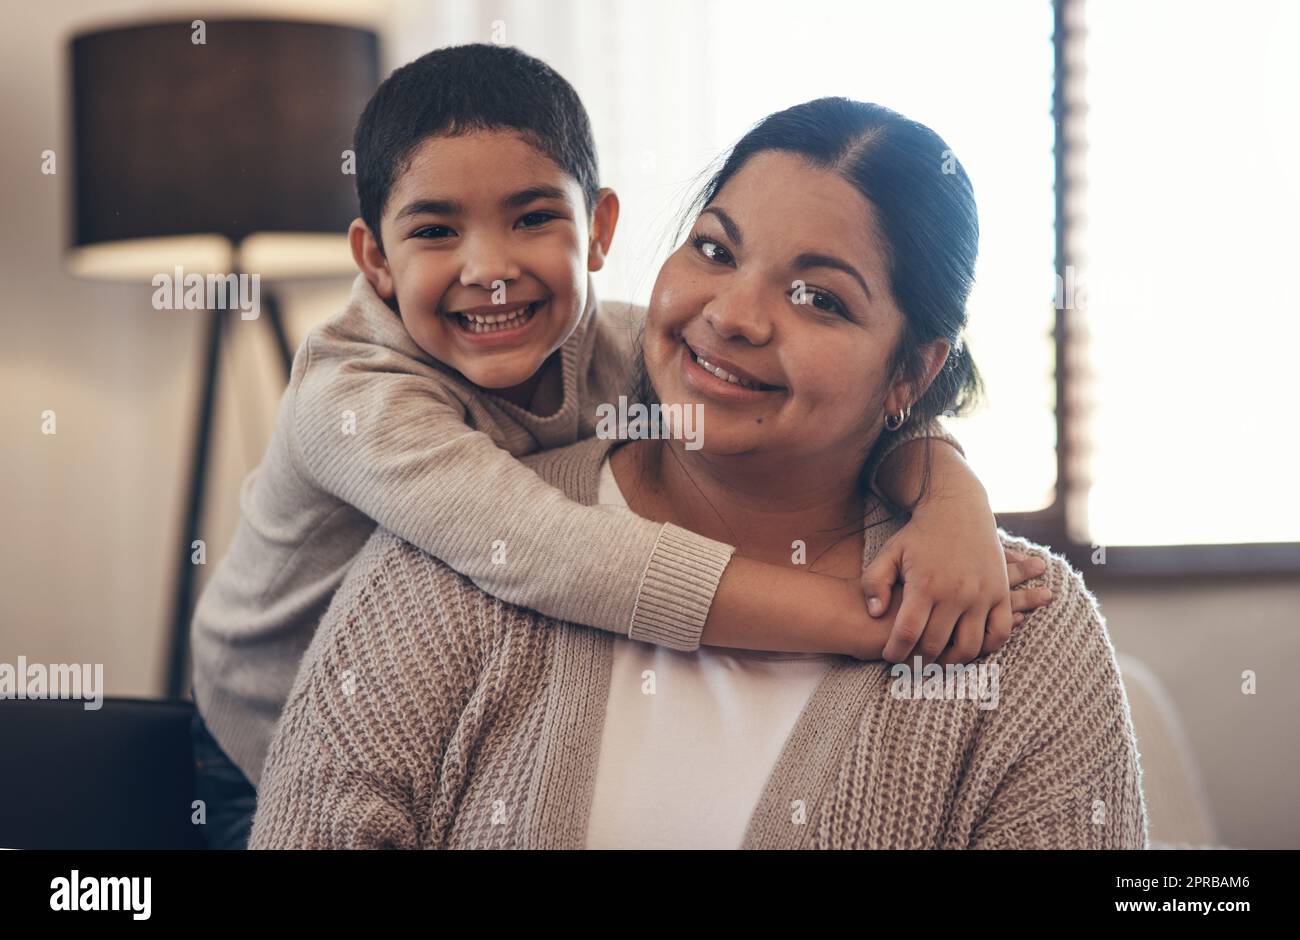 A boys best friend is his mamma. Portrait of an adorable little boy spending quality time with his mother at home. Stock Photo